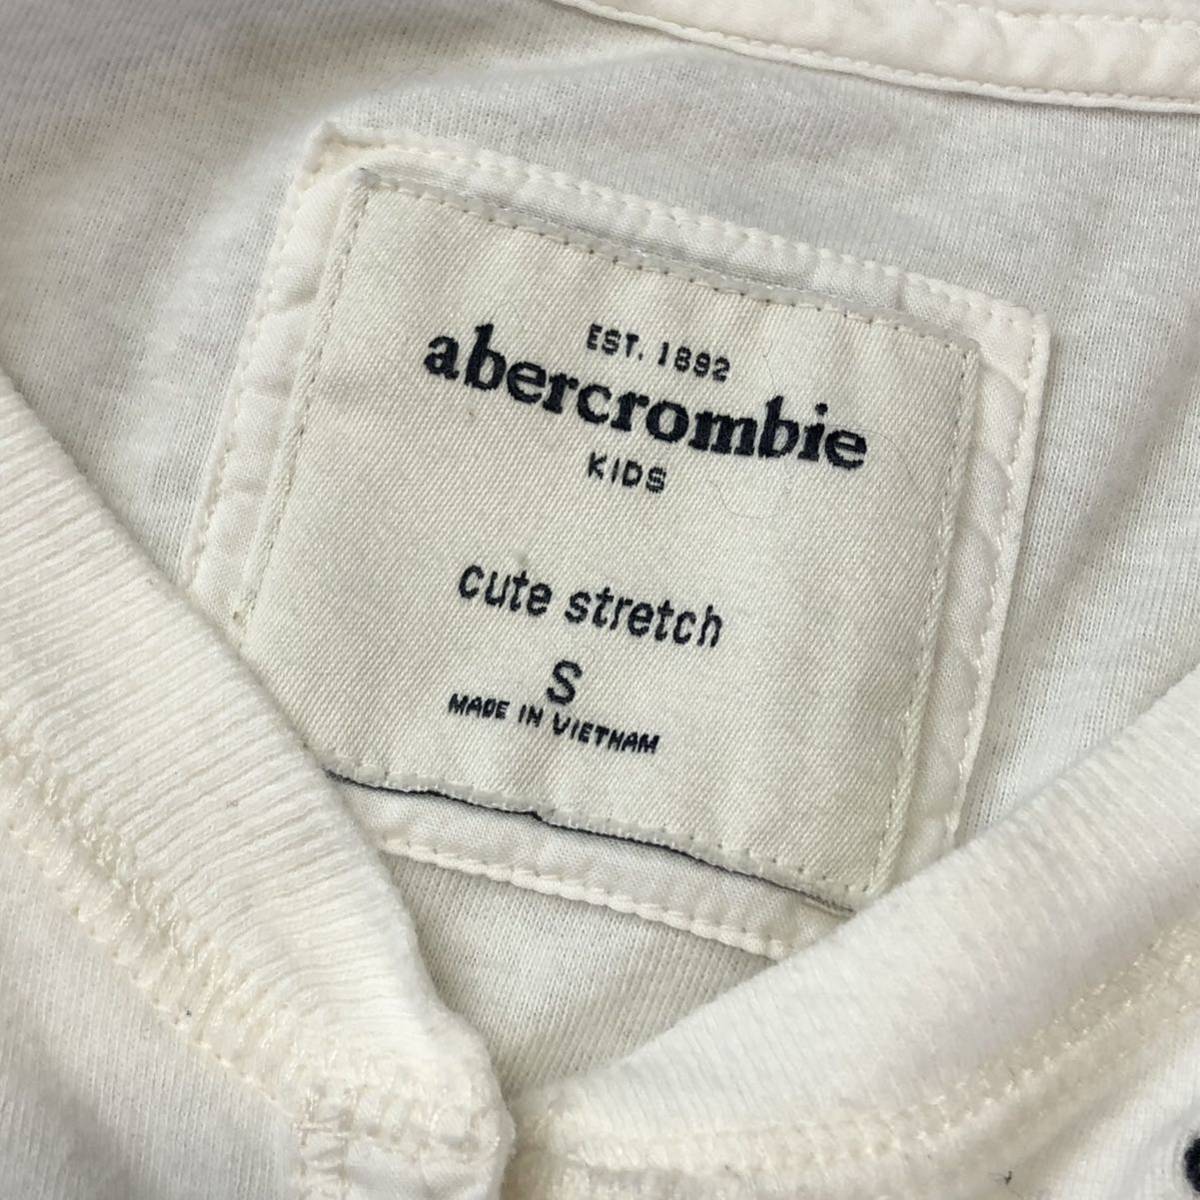 Aberarombie&FITCH Abercrombie & Fitch Abercrombie & Fitch cutestretch Henry рубашка cut and sewn one отметка белый Kids размер S